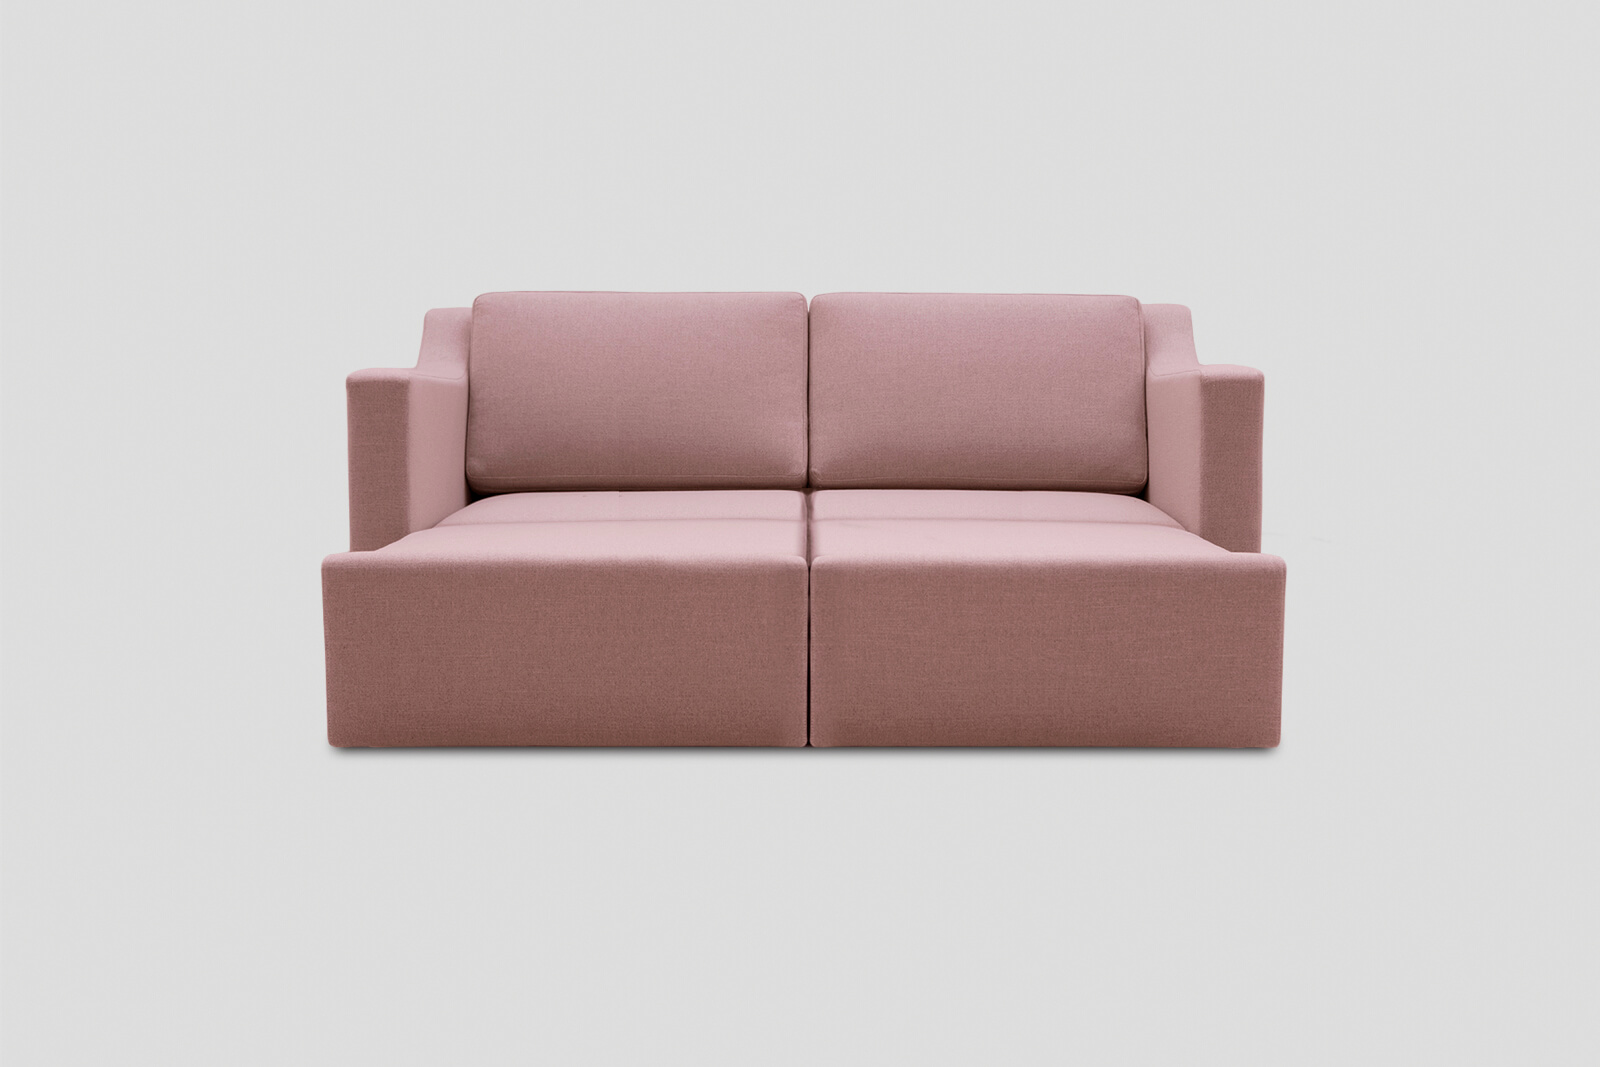 HBSB02-kingsize-sofa-bed-rosewater-front-daybed